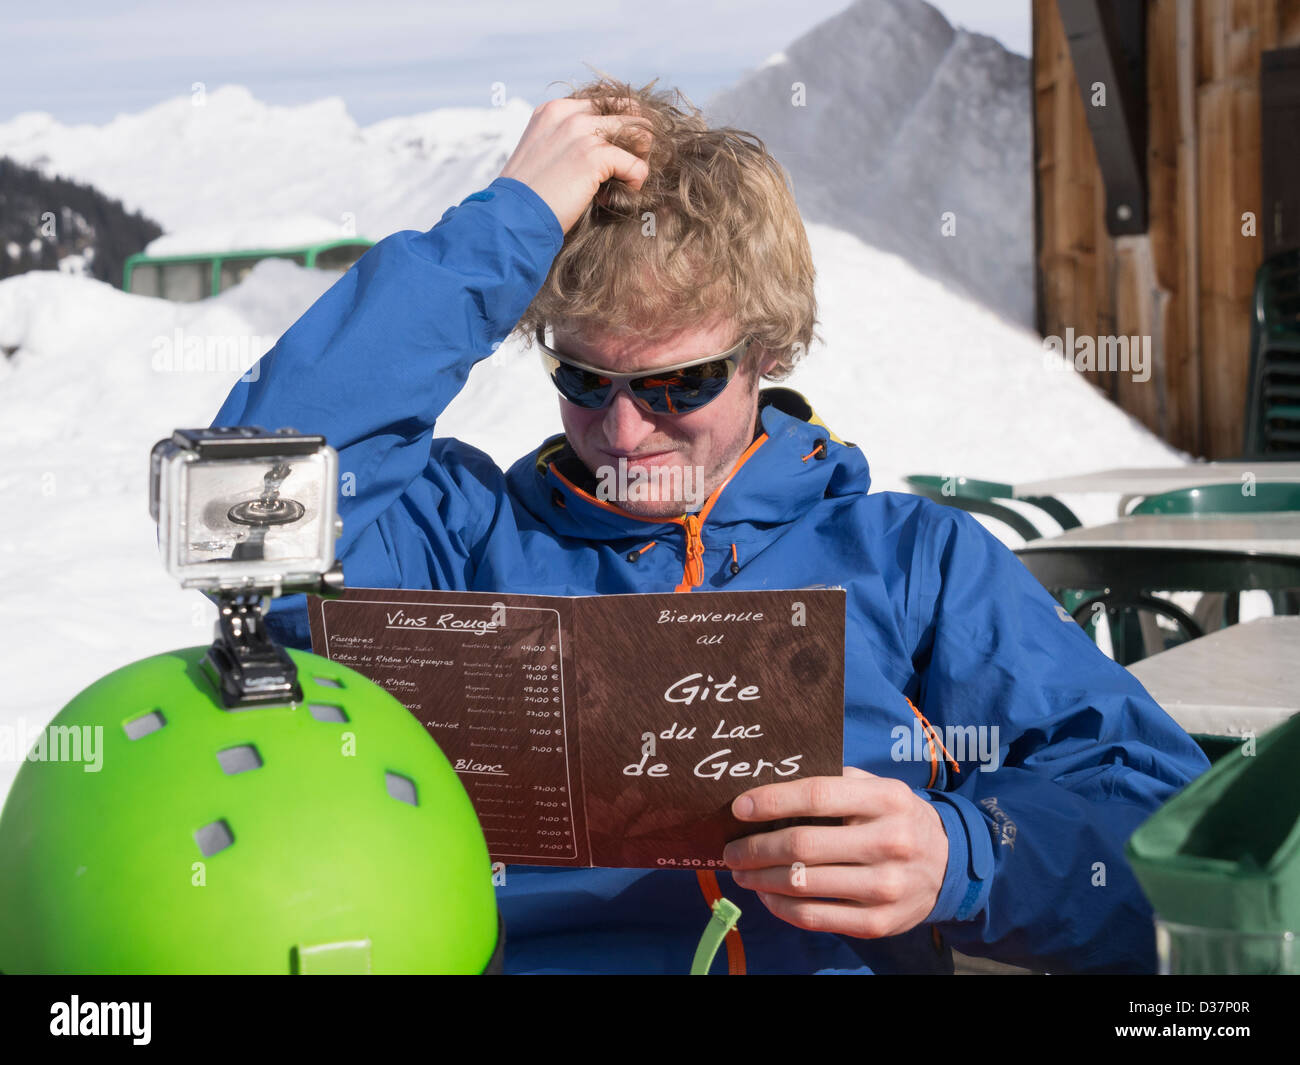 Man thinking scratching his head whilst trying to decide what to eat from a menu outside Gite du Lac de Gers ski restaurant in winter. Samoens France Stock Photo